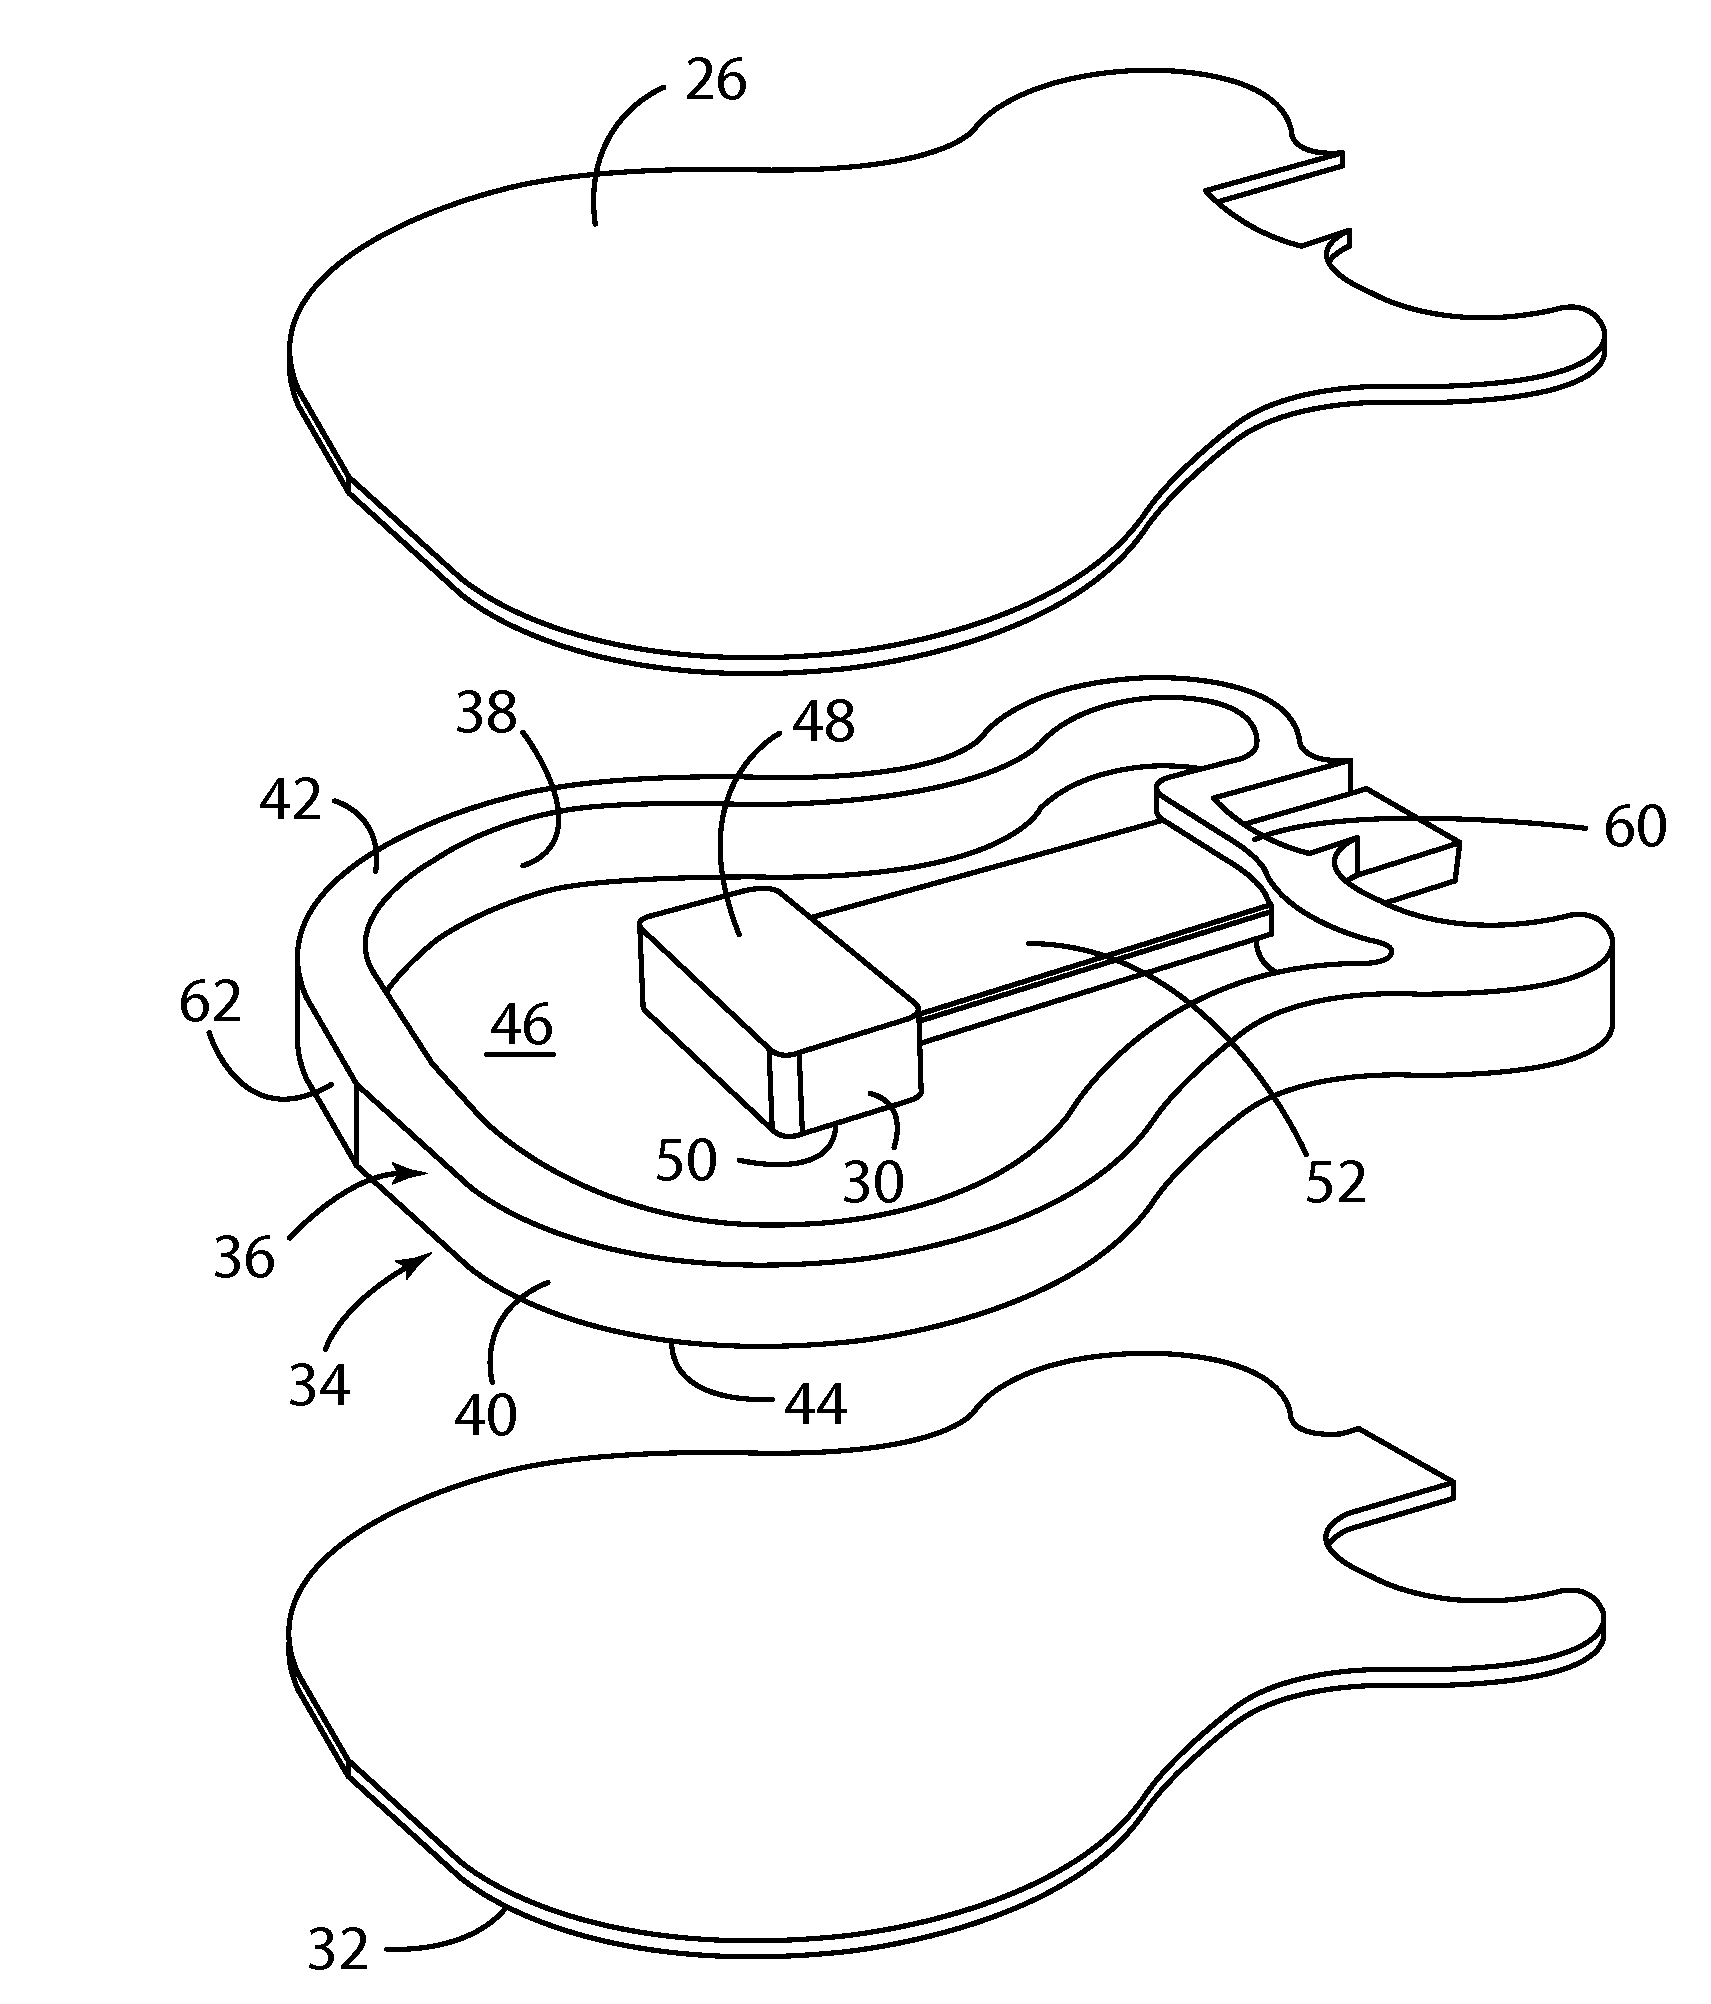 Structure for musical instrument body